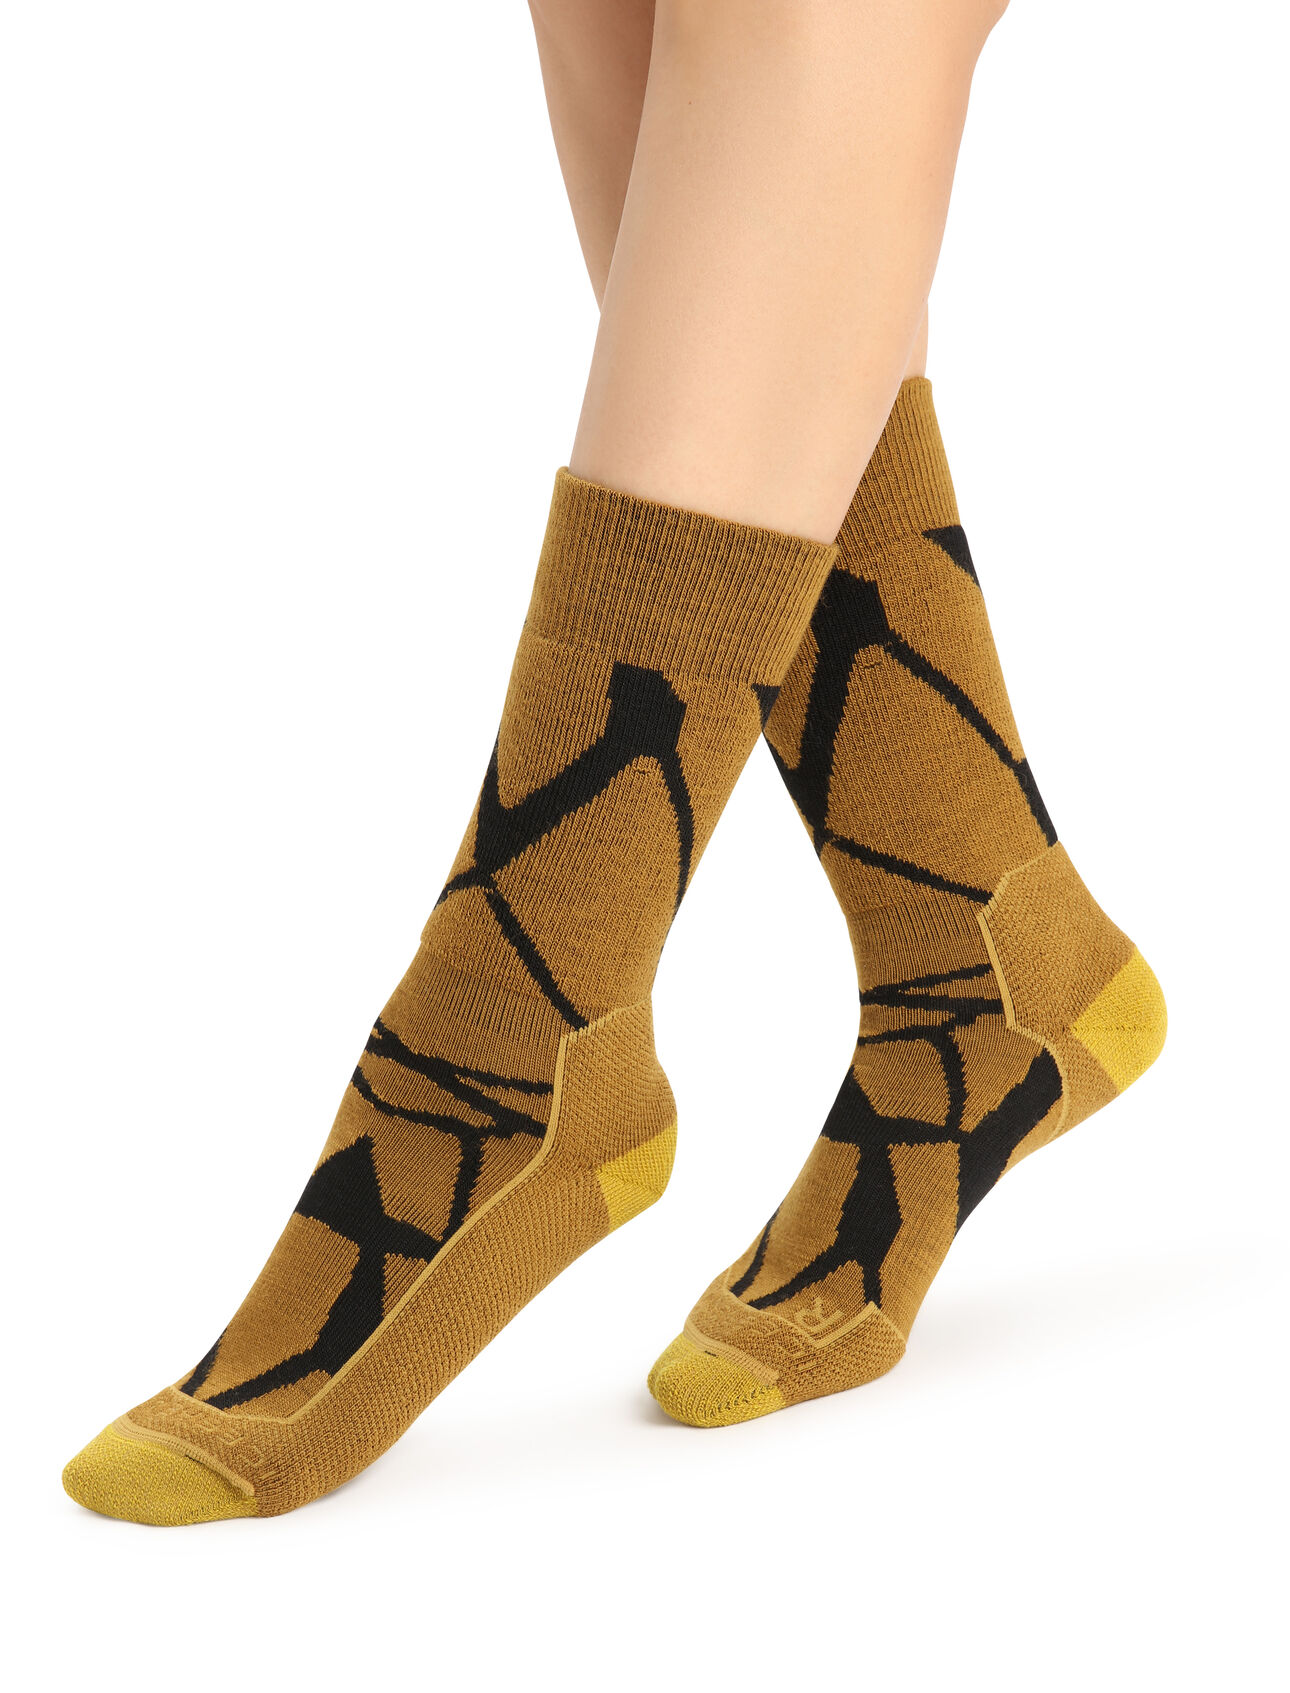 Womens Merino Hike+ Medium Crew Socks Fractured Landscapes Durable, crew-length merino socks that are stretchy and naturally odor-resistant with medium cushion, the Hike+ Medium Crew Fractured Landscapes socks feature an anatomical sculpted design for added support on day hikes and backpacking  trips.